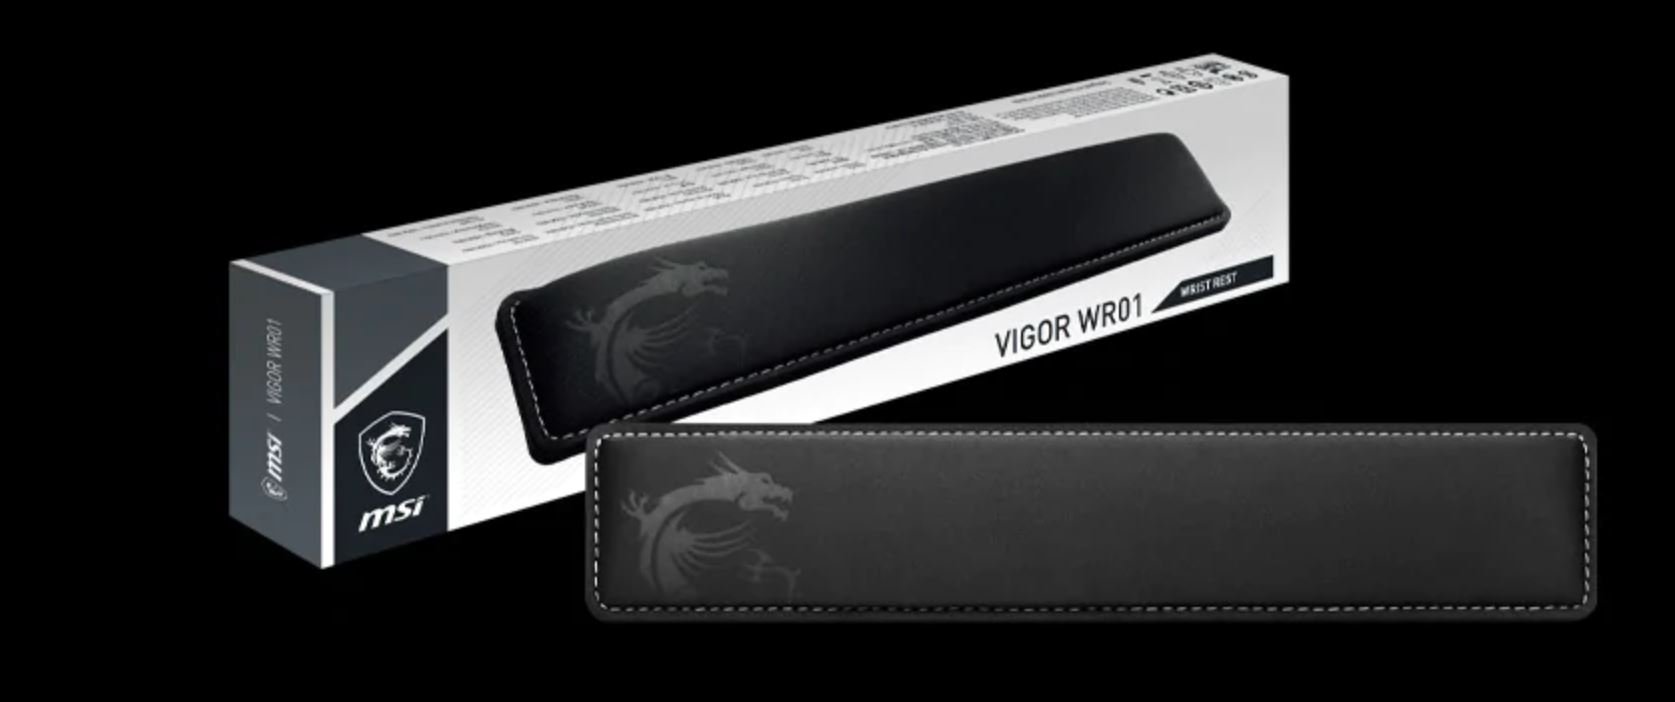 Gaming Write Rest VIGOR WR01 MSI Release New Gaming Accessories: Keyboard, Mouse & Wrist Rest